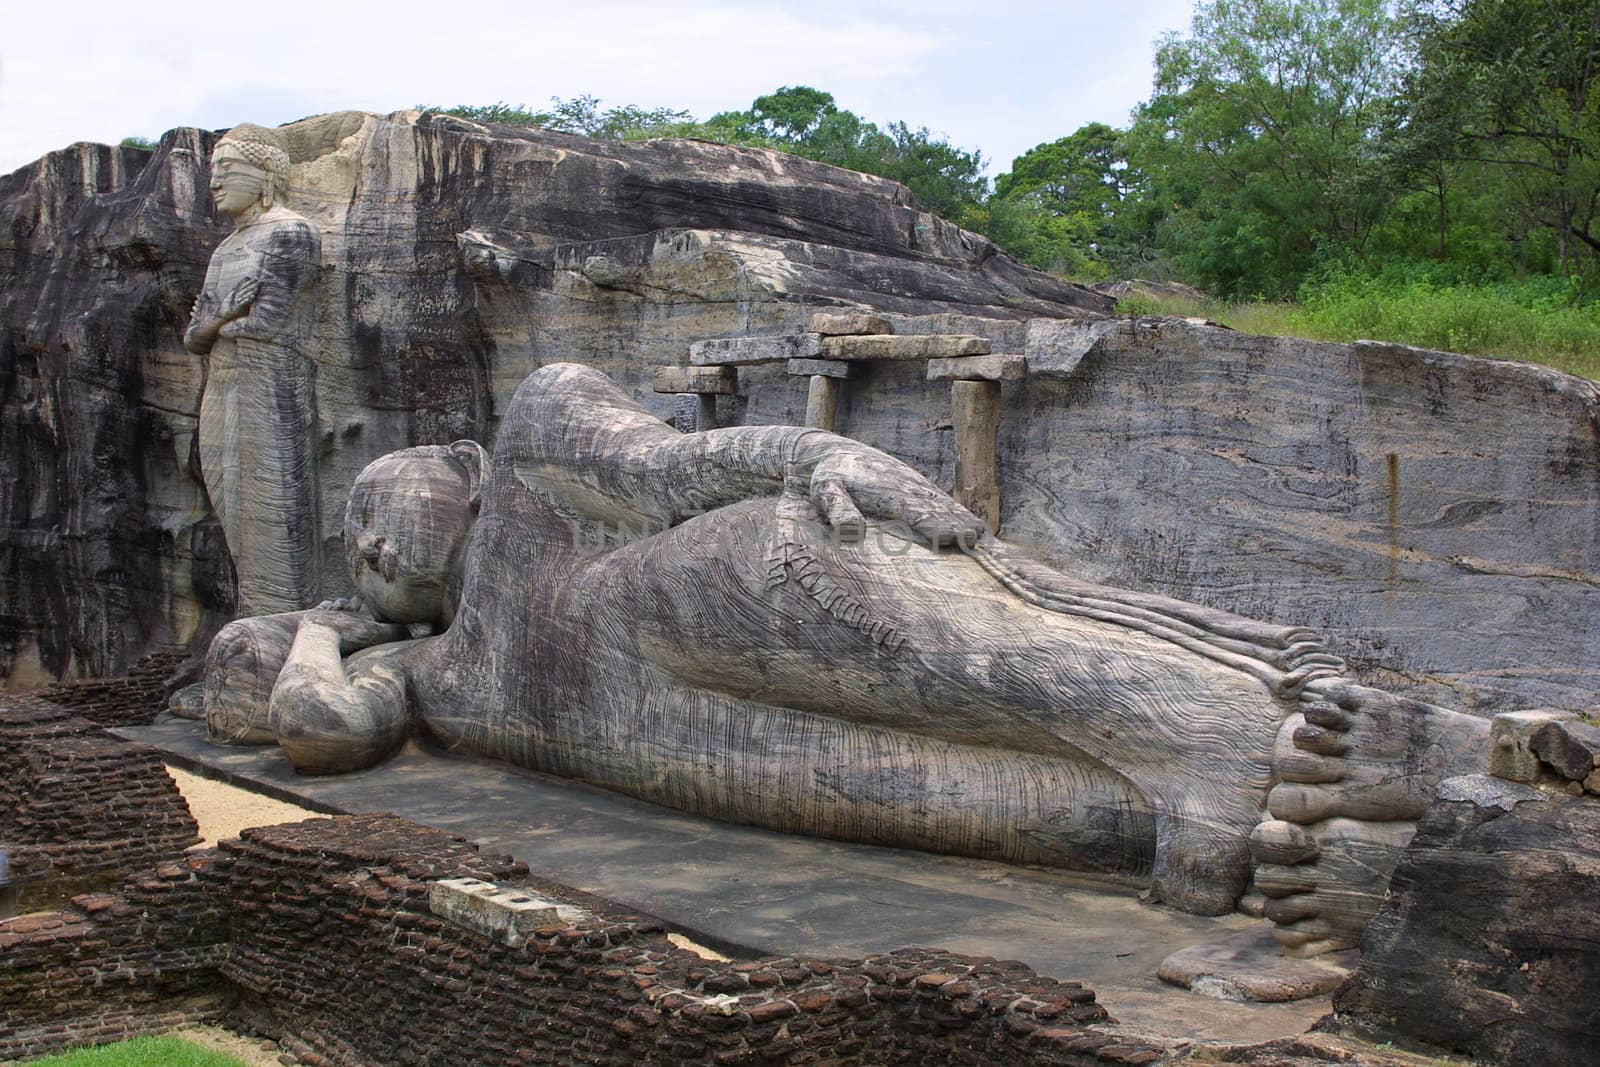 The Reclining and Standing Buddhas were carved out of a granite cliff at Gal Vihariya in Pollanaruwa, Sri Lanka. They are part of one of the most important Buddhist shrines in the world and also a part of a UNESCO World Heritage Site.